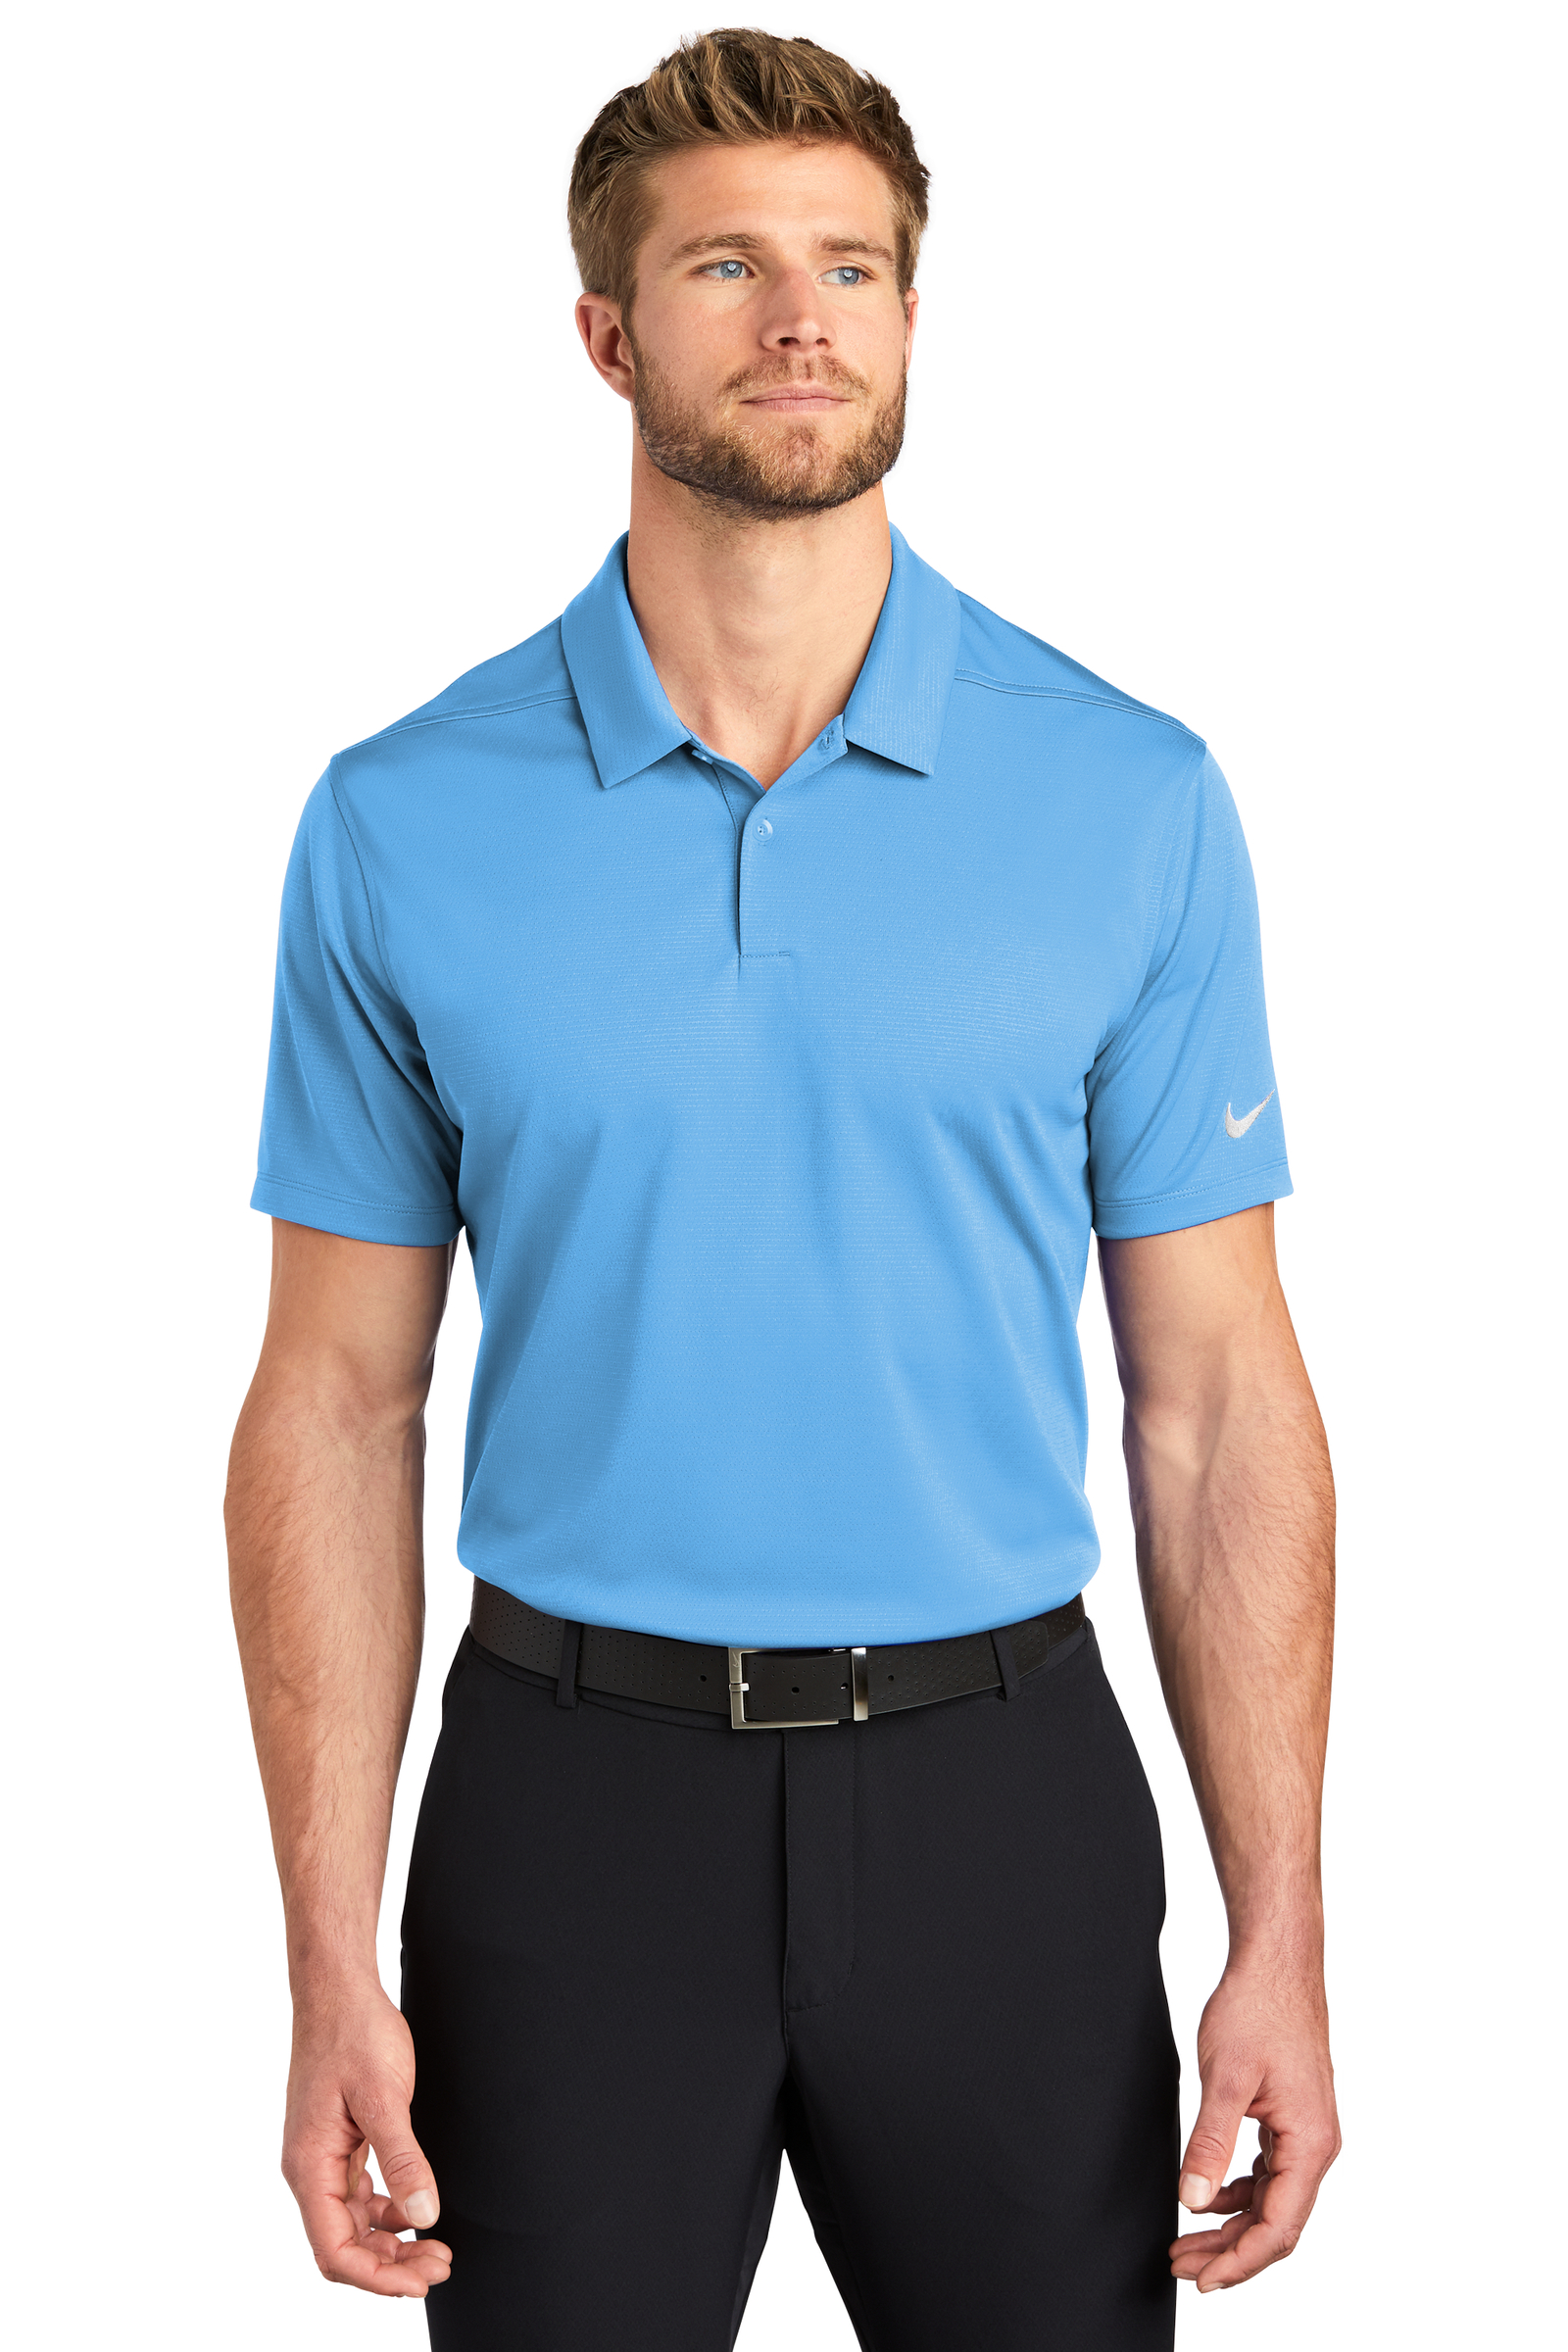 Nike Embroidered Men's Dry Essential Solid Polo